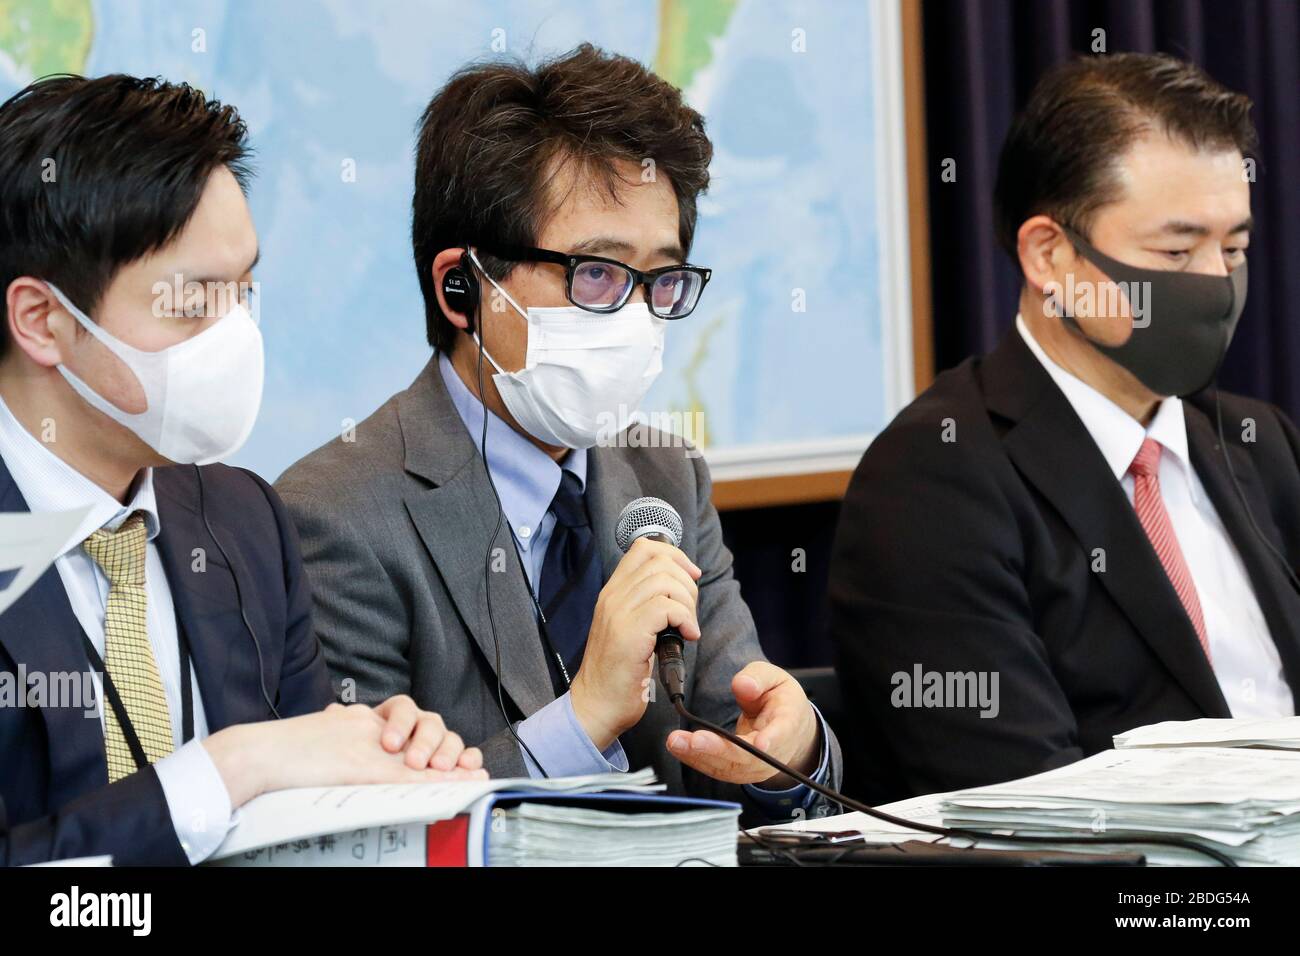 April 8 2020 Tokyo Japan Yasuyuki Sahara Senior Assistant Minister For Global Health Minister S Secretariat Ministry Of Health Labor And Welfare Wearing A Face Mask Speaks During A News Conference At The